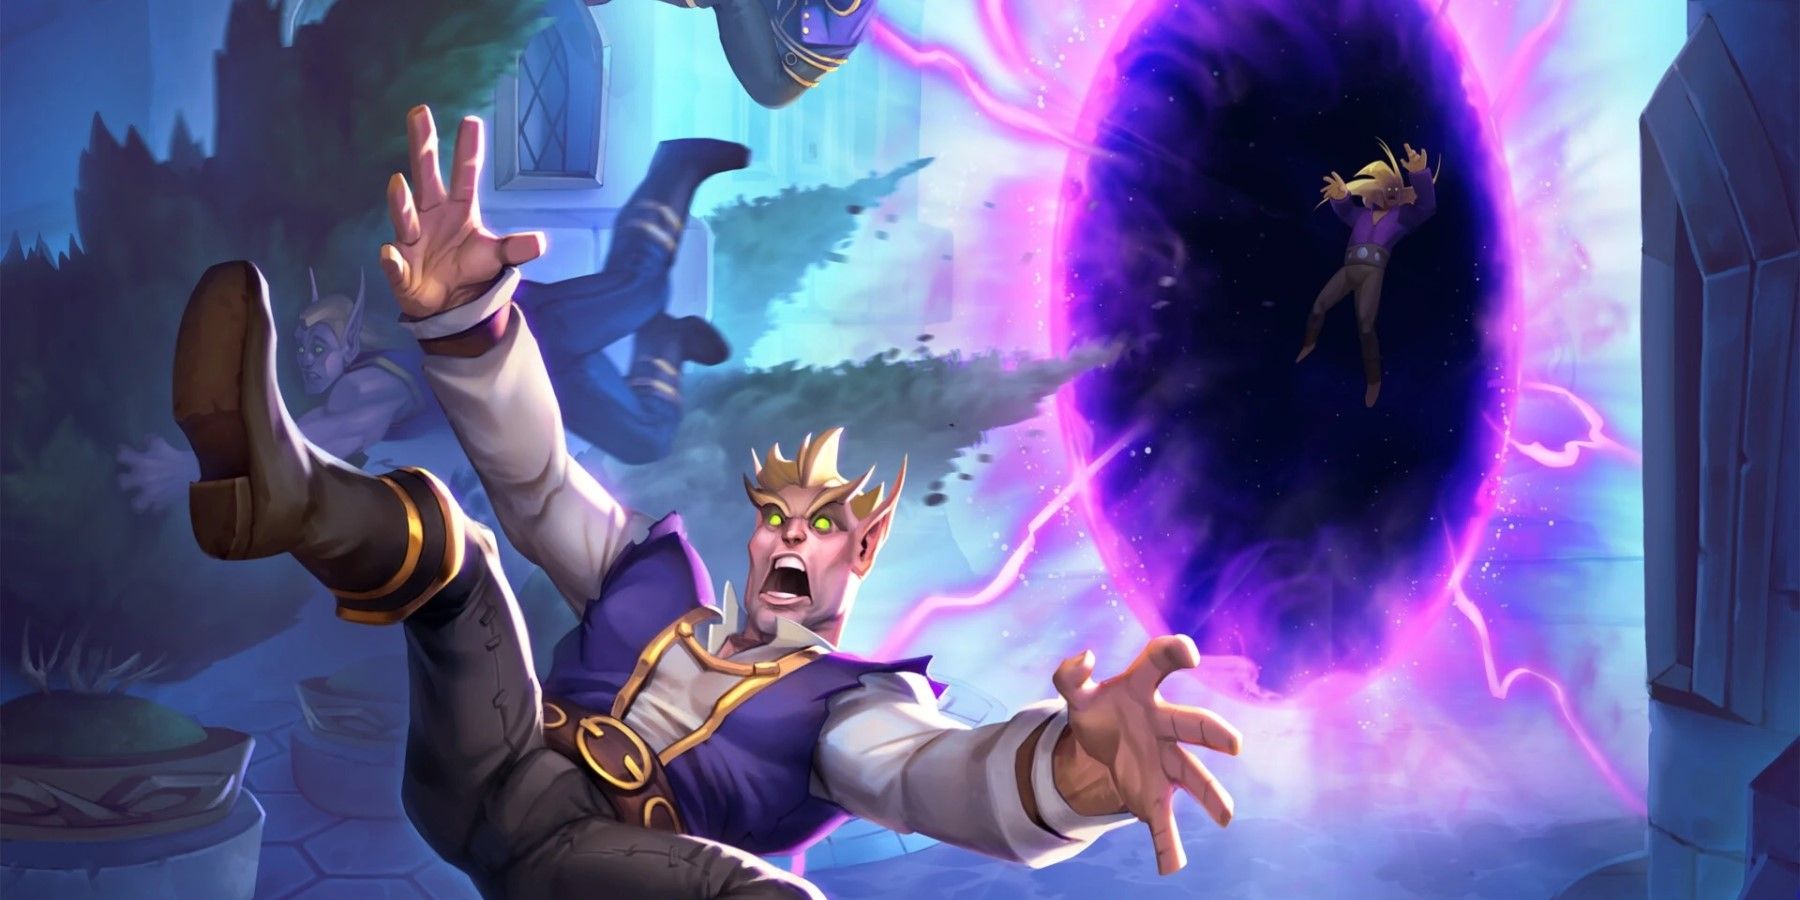 Hearthstone introduces Twist mode and retires Classic